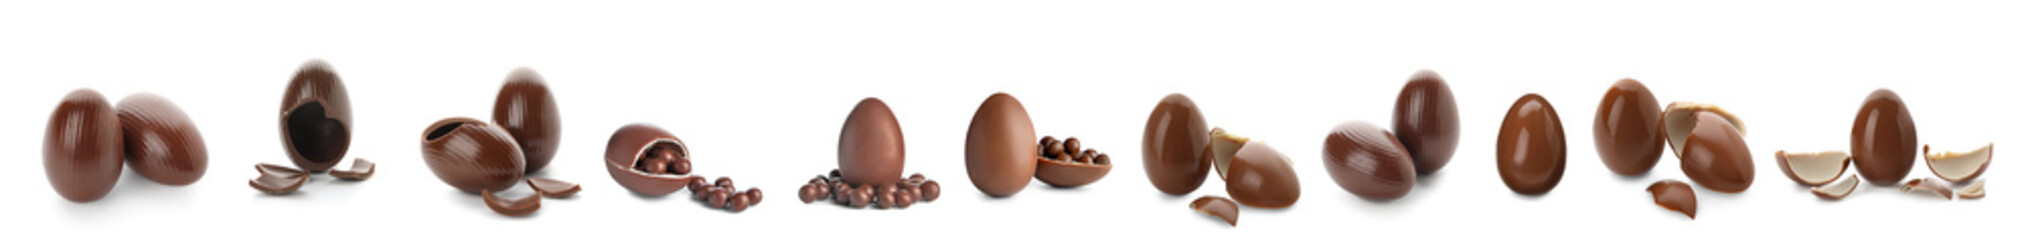 Sweet chocolate Easter eggs with candies on white background